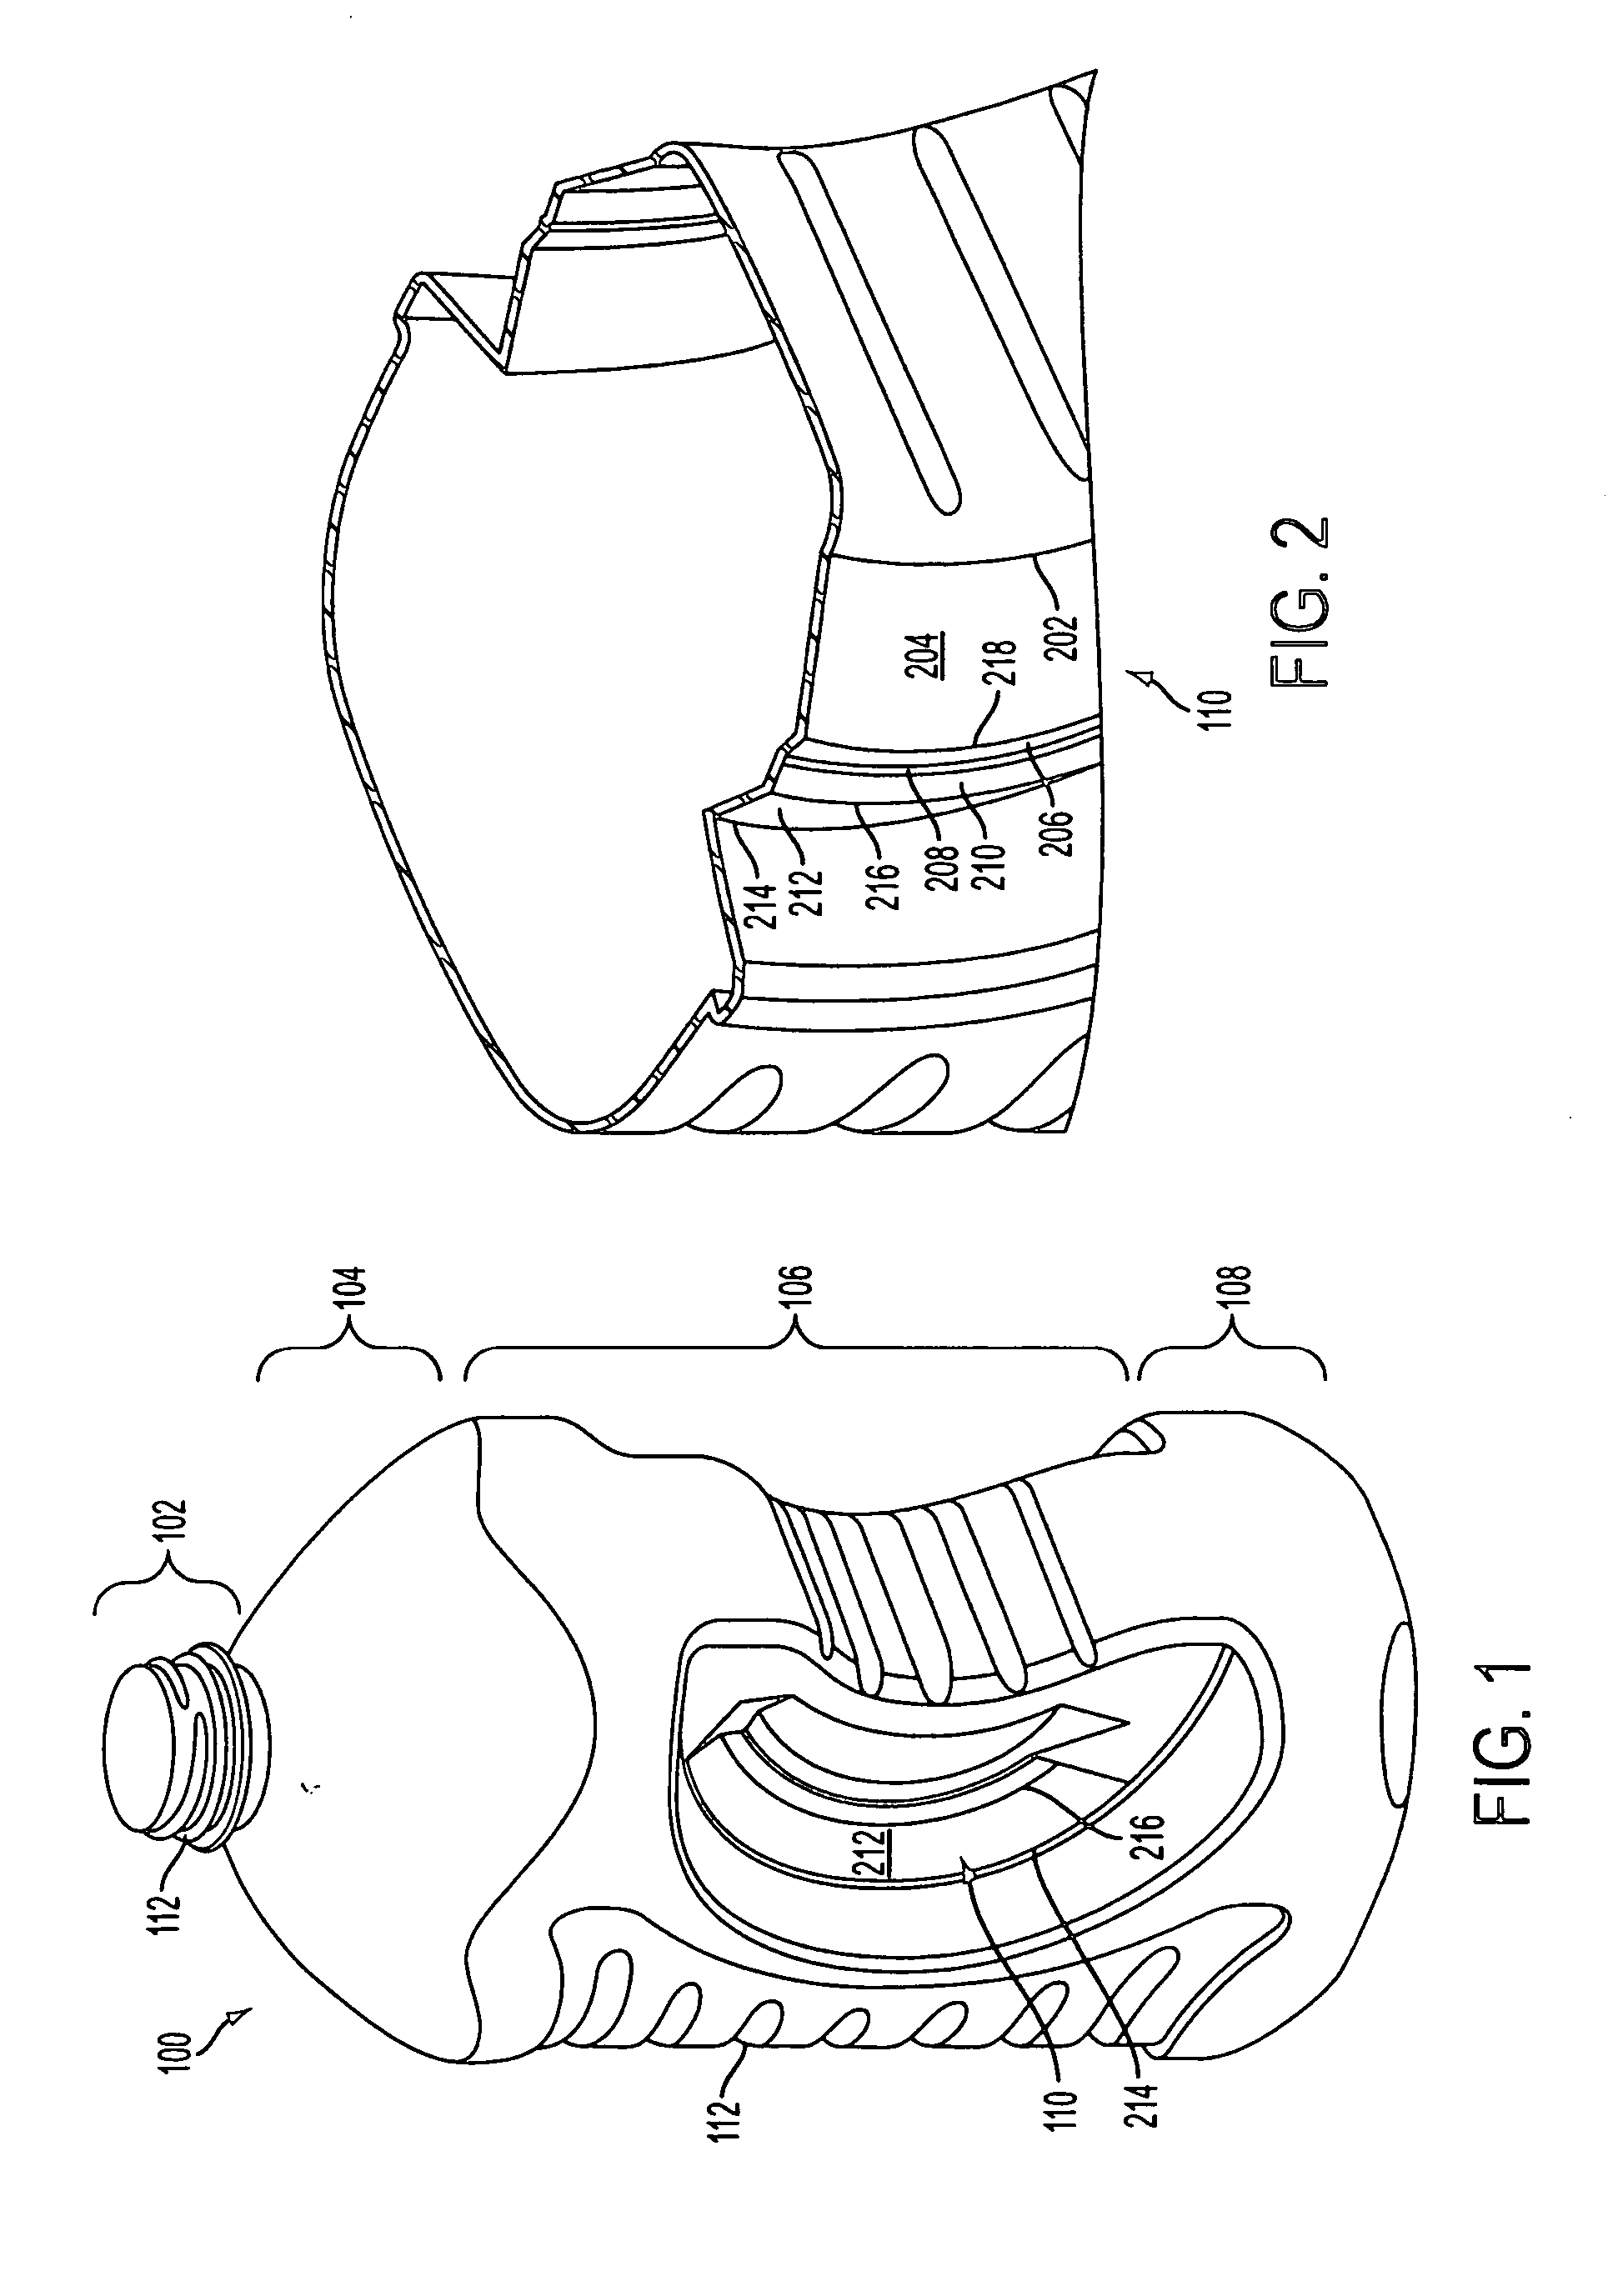 System and method for forming a container having a grip region